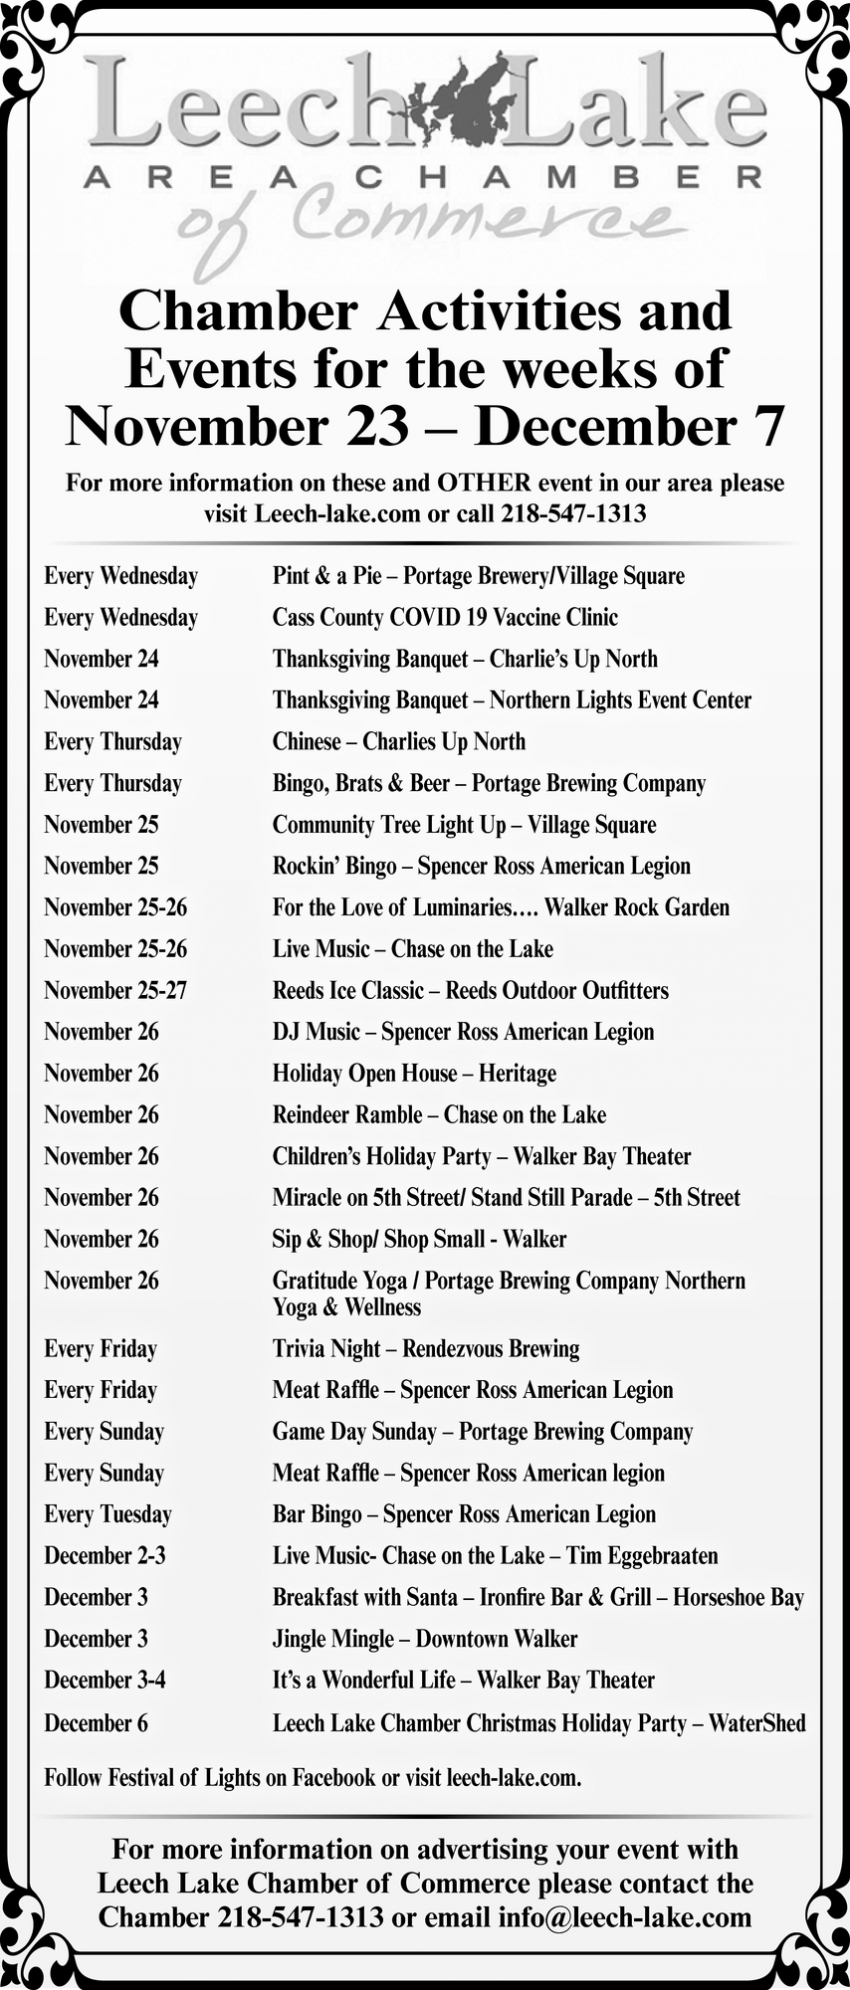 Chamber Activities and Events for the Weeks of November 23 - December 7